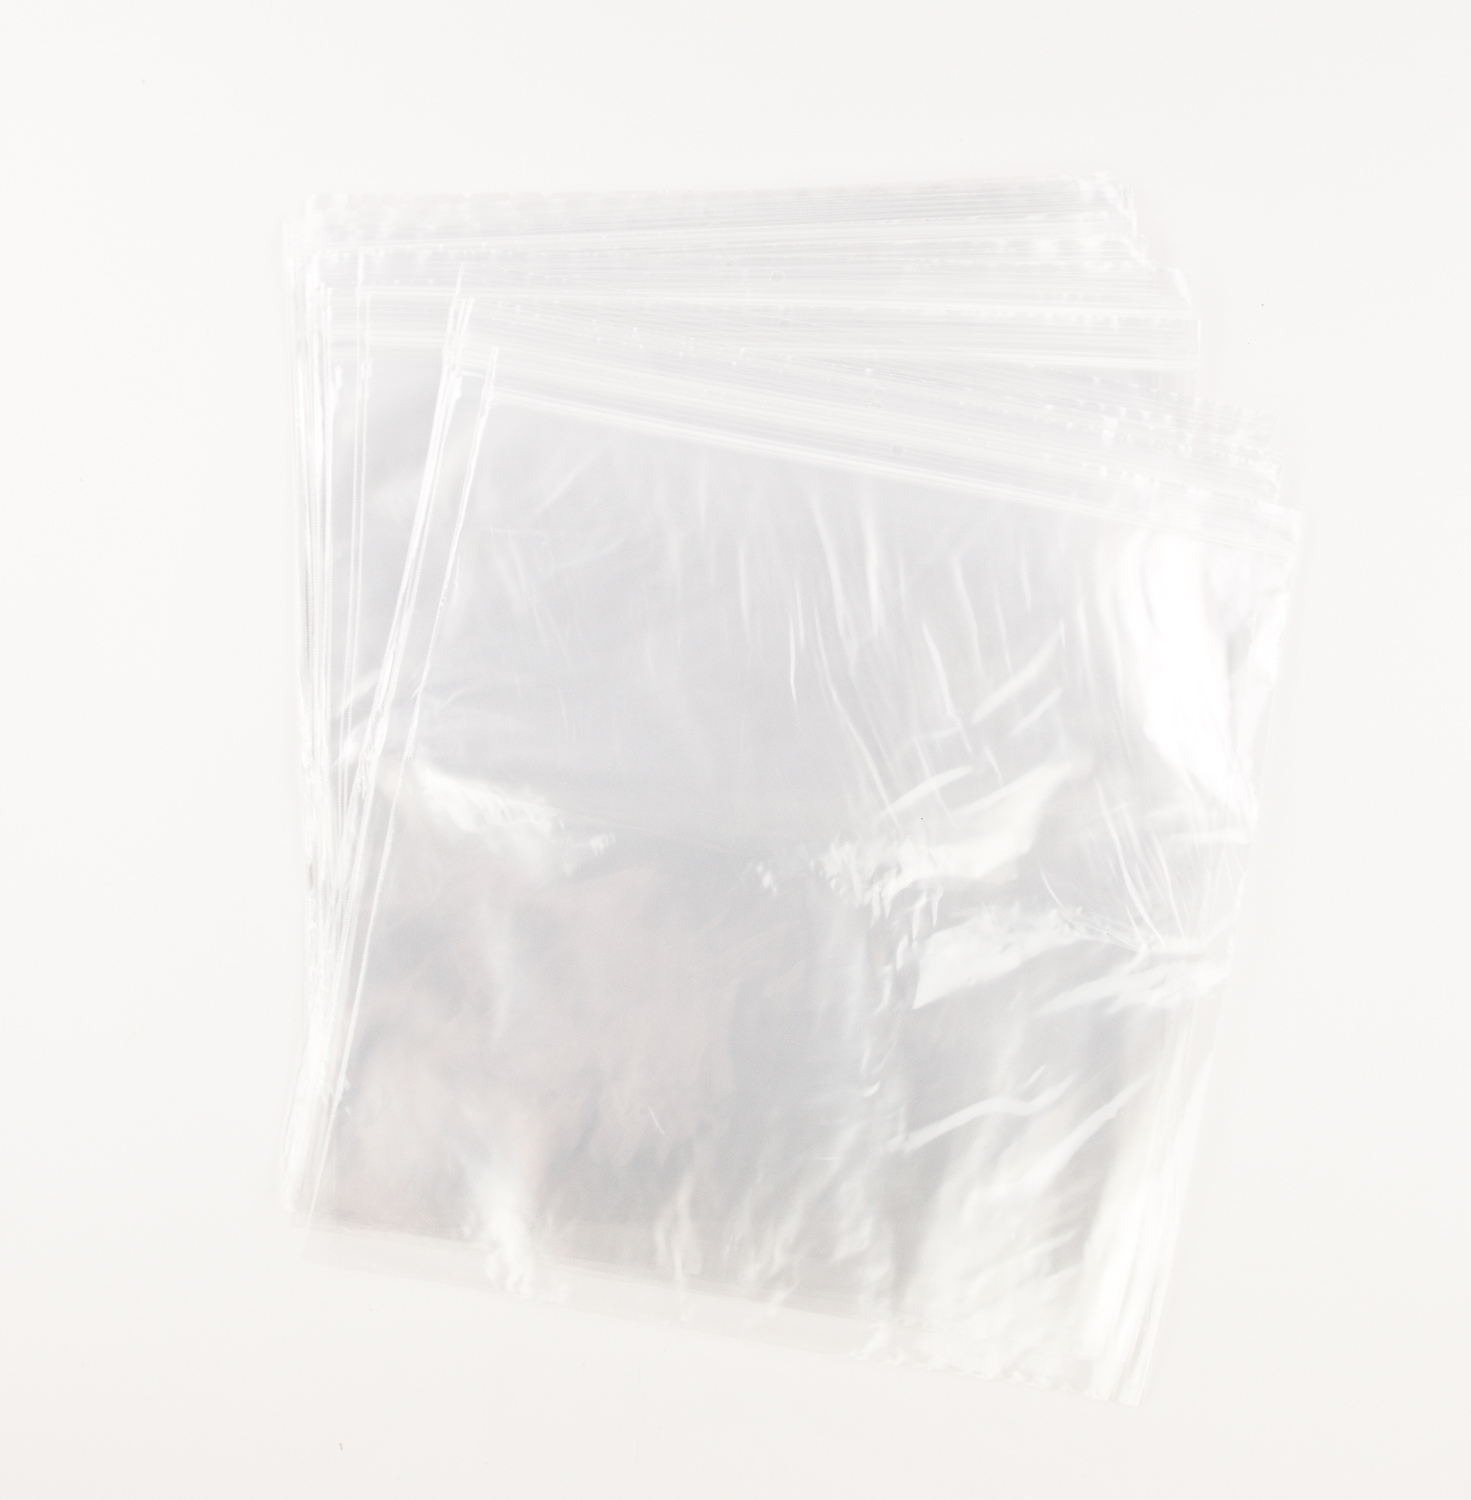 Sac plastique refermable 12x12 x1000 - Sac refermable